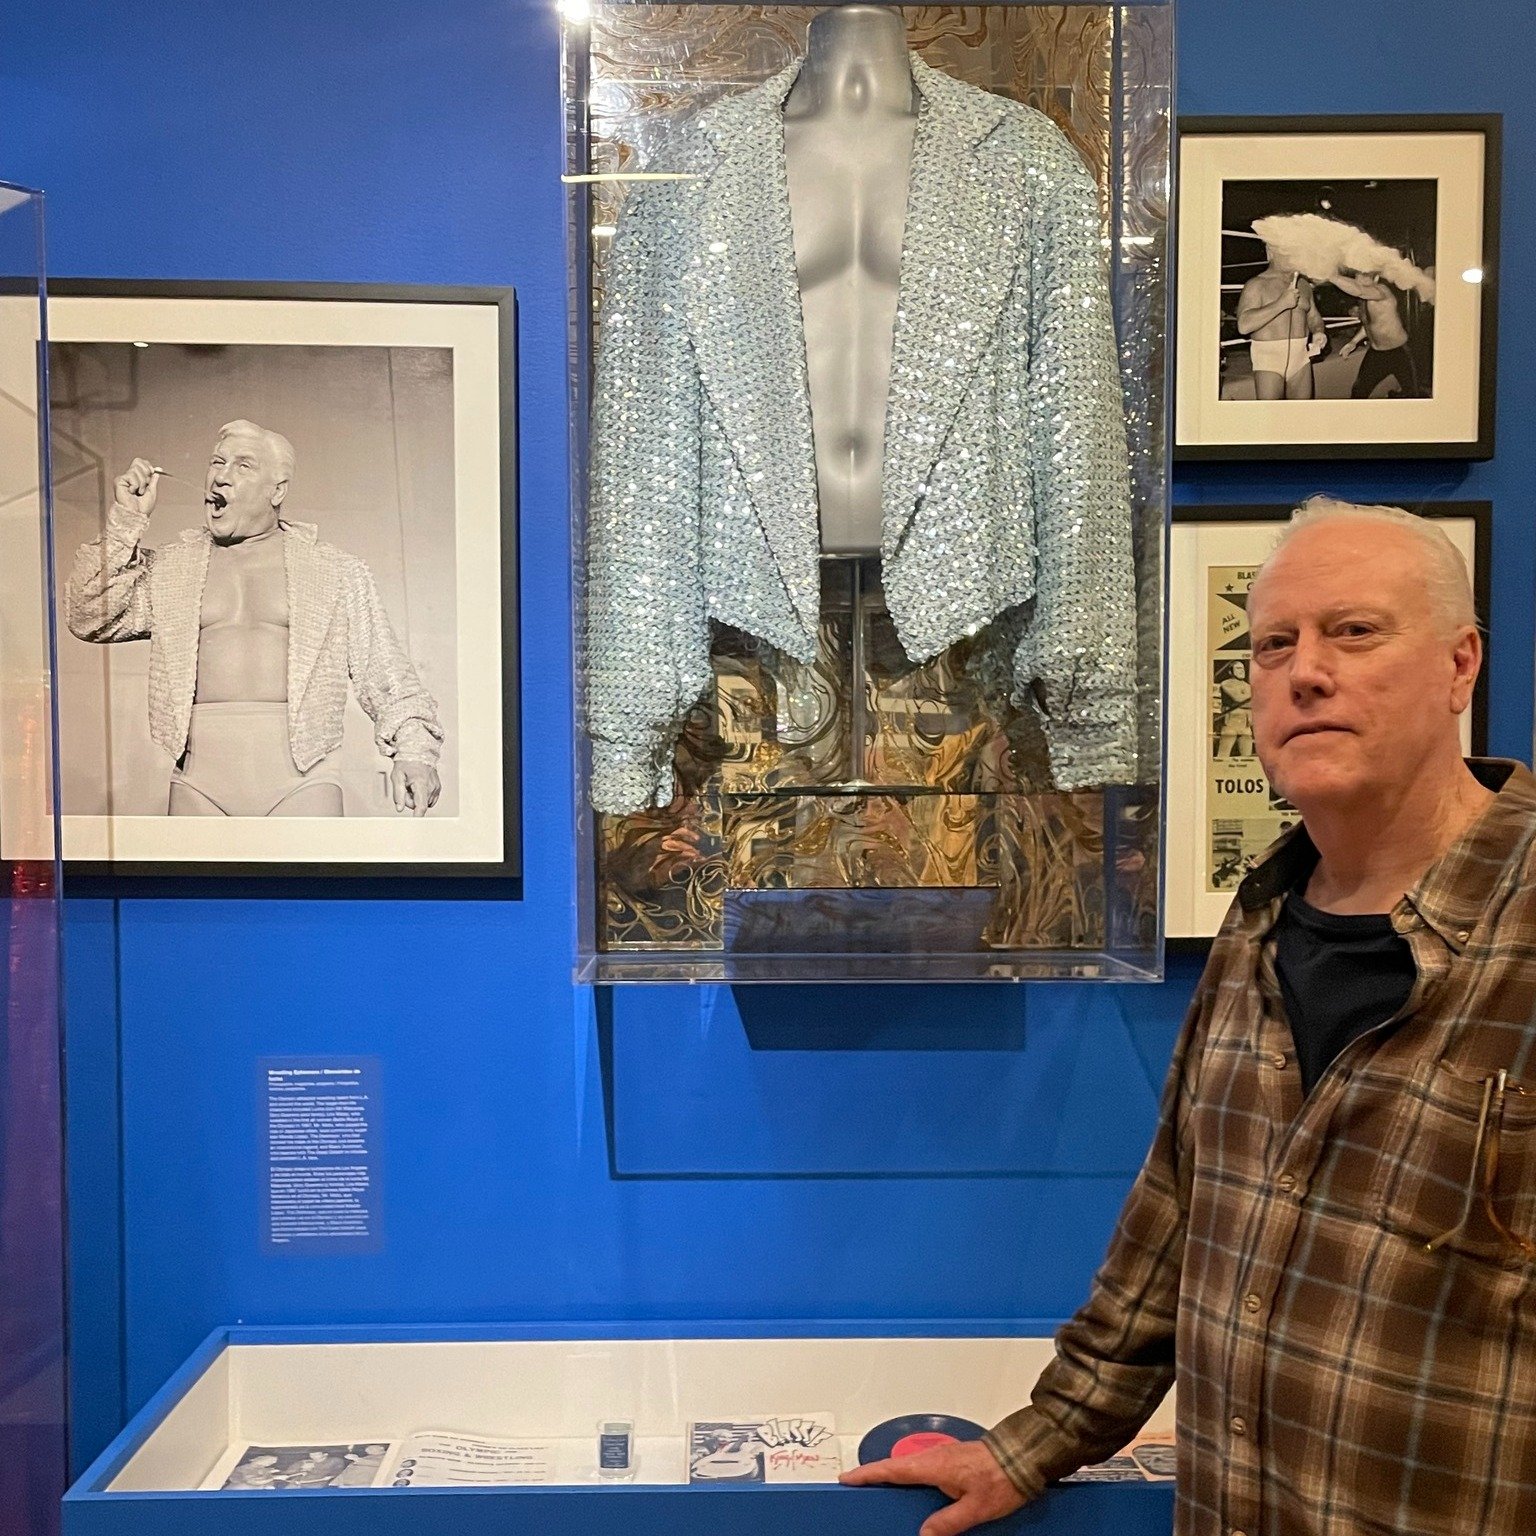 Glenn Bray, who lent @laplazala remarkable items from his wrestling collection for the 18th &amp; Grand: The Olympic Auditorium exhibition, visited the museum recently along with historian Steve Yohe and photographer Dan Westbrook. Glenn, who was a r